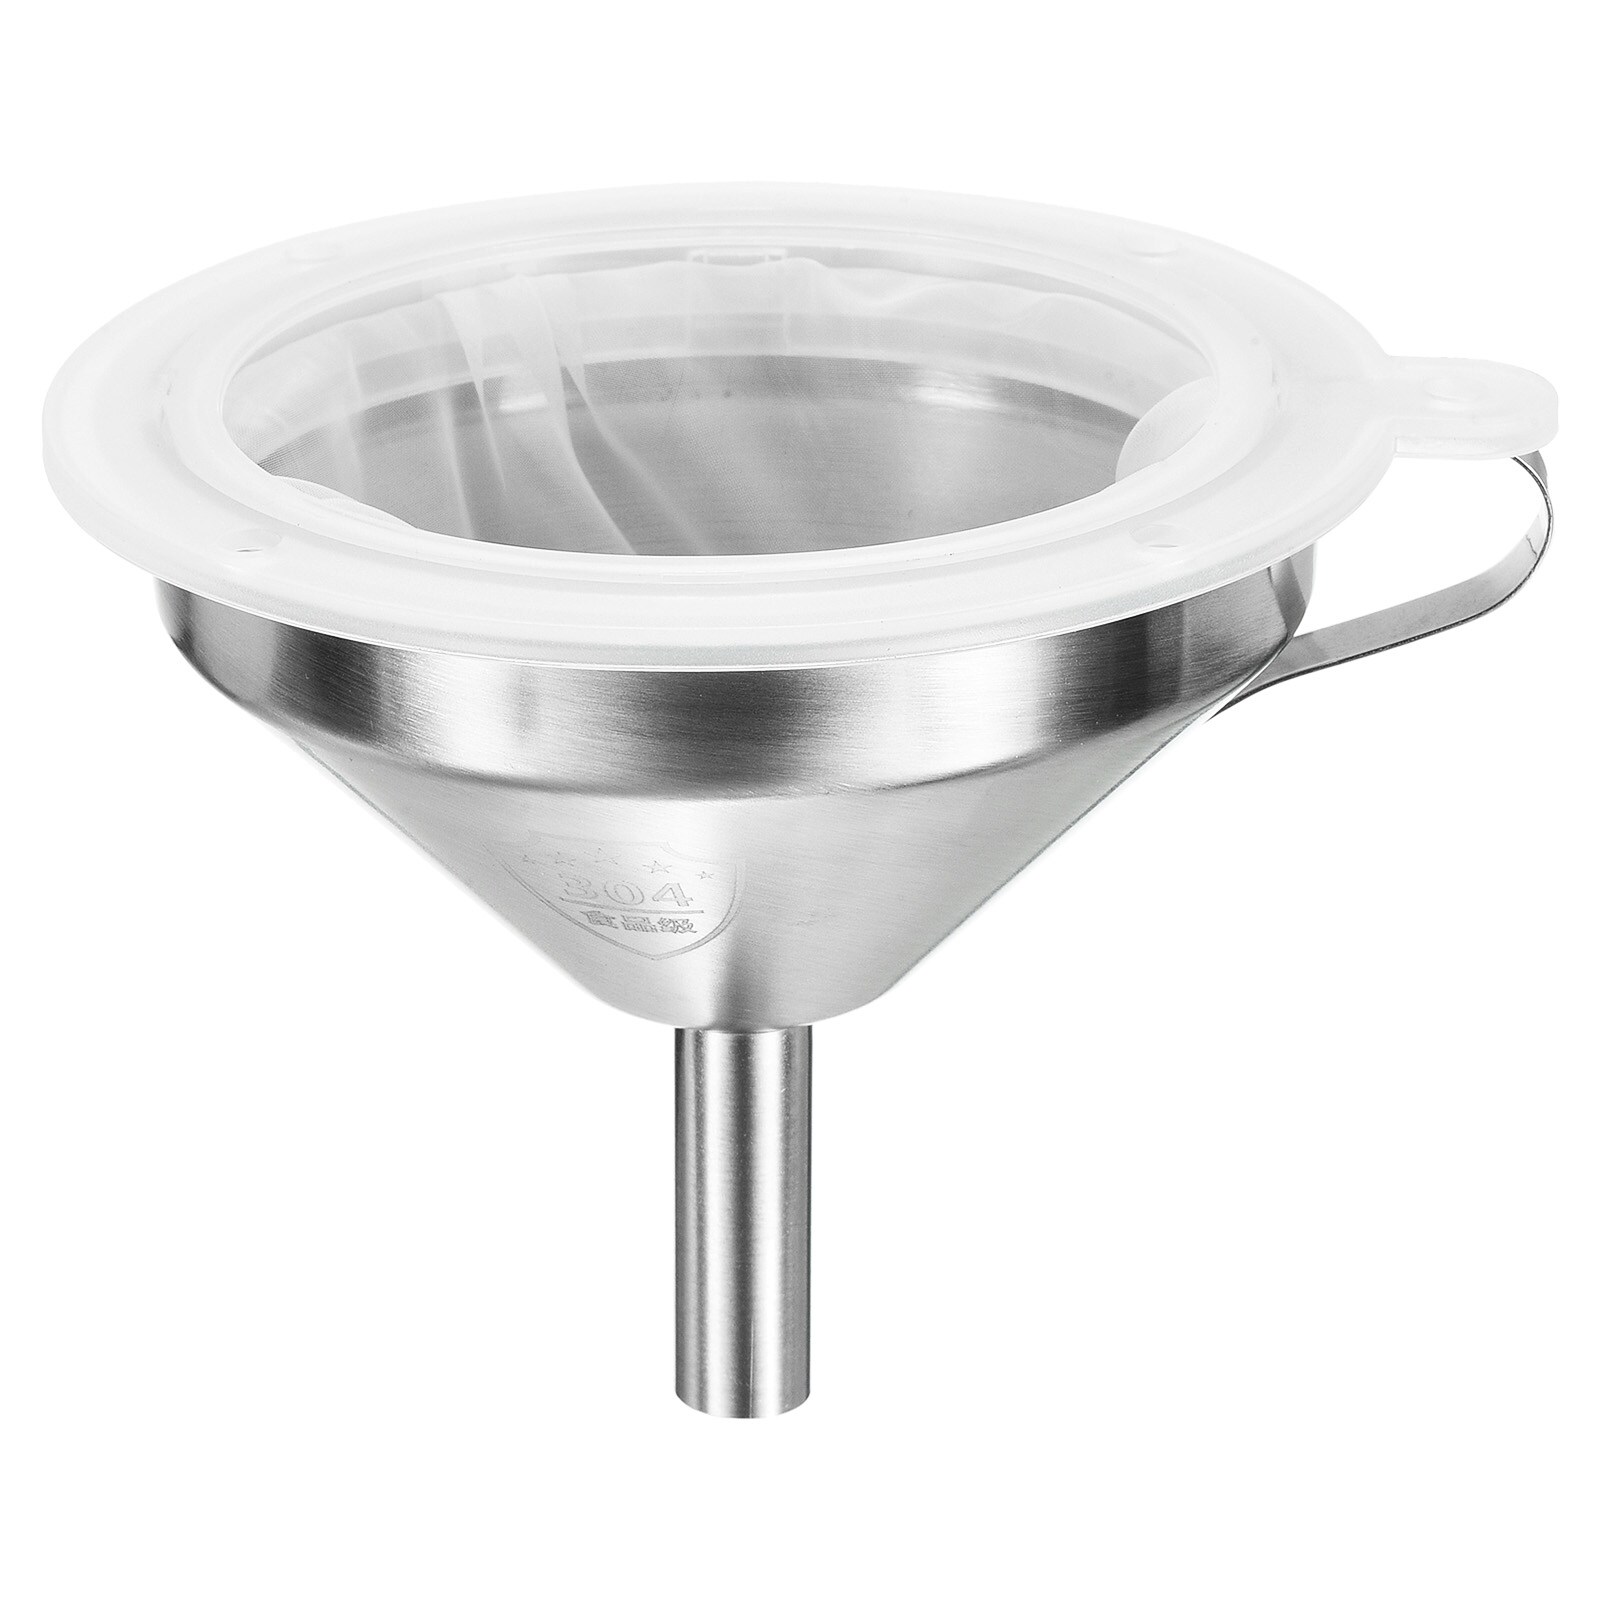 https://ak1.ostkcdn.com/images/products/is/images/direct/ec423e066840b9c30b8e334cc86e588c8e0f2f59/5.1%22-Dia-Stainless-Steel-Kitchen-Funnel-with-100-Mesh-Strainer-White-Silver-Tone.jpg